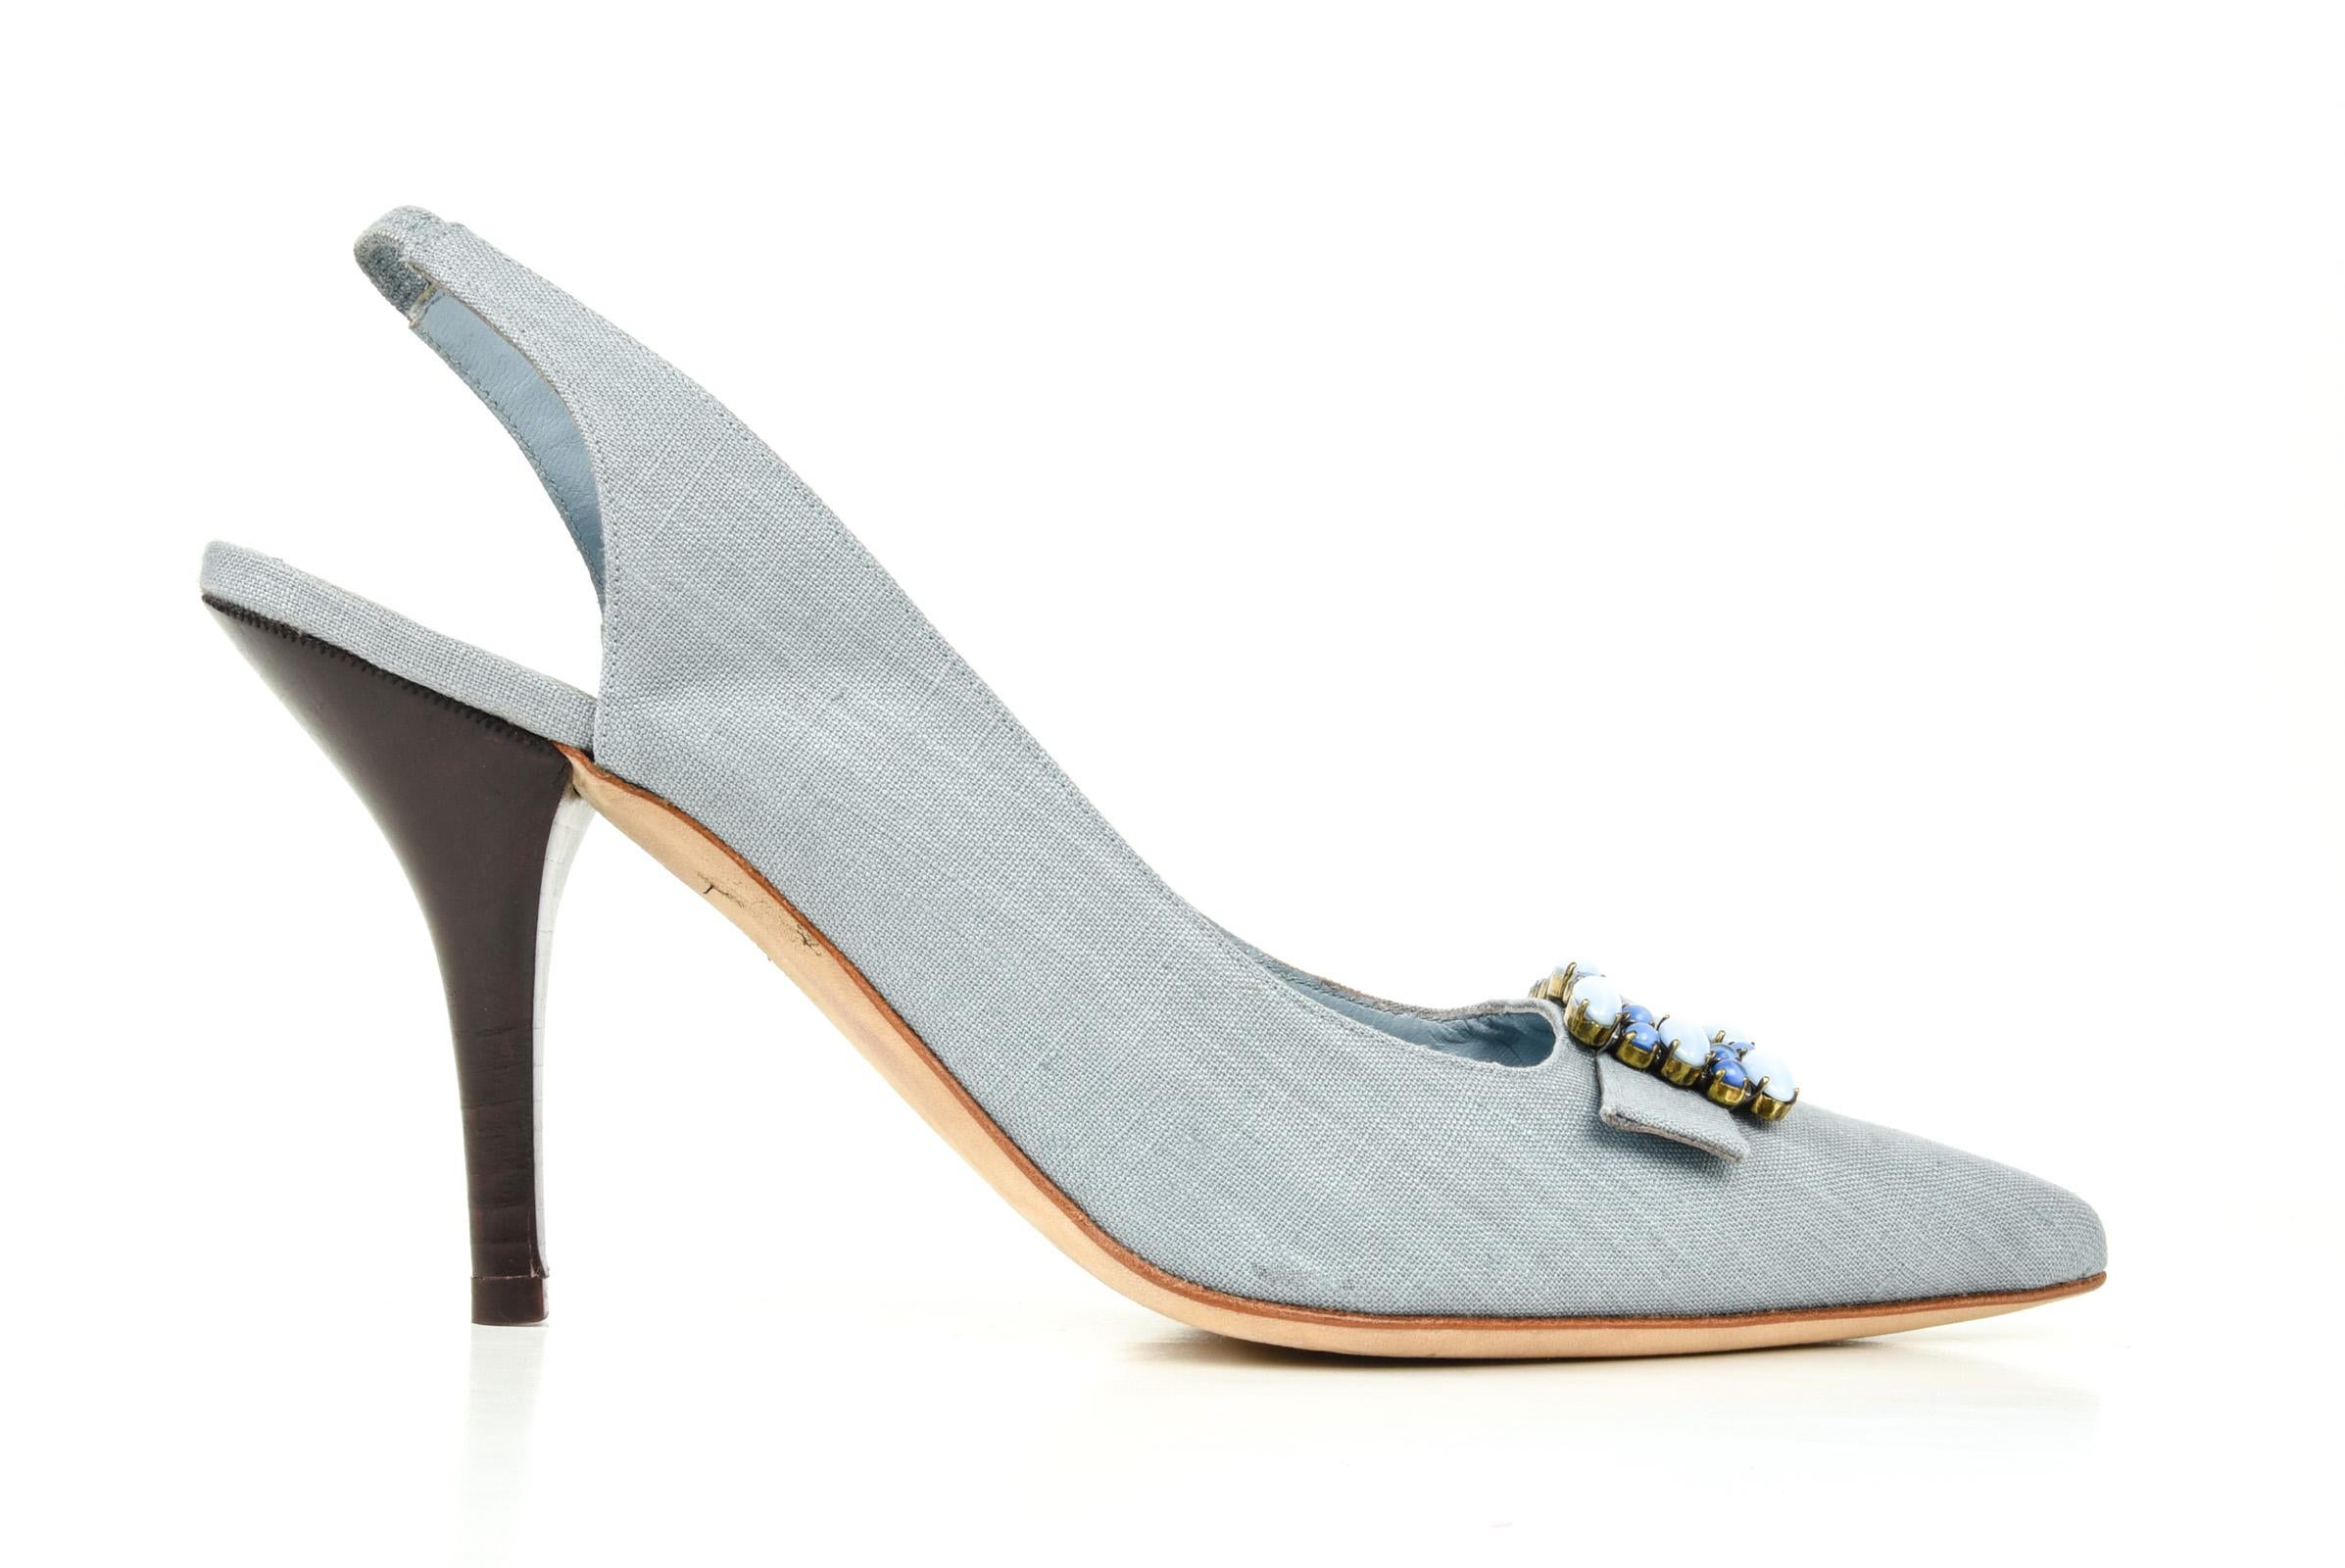 Guaranteed authentic Manolo Blahnik light blue textile slingback shoe.
Medium and light blue beaded buckle over toe.
Stacked dark brown heel and pointed toe.
Comes with sleeper.
final sale
              
SIZE  40.5
USA SIZE 10.5    

SHOE 